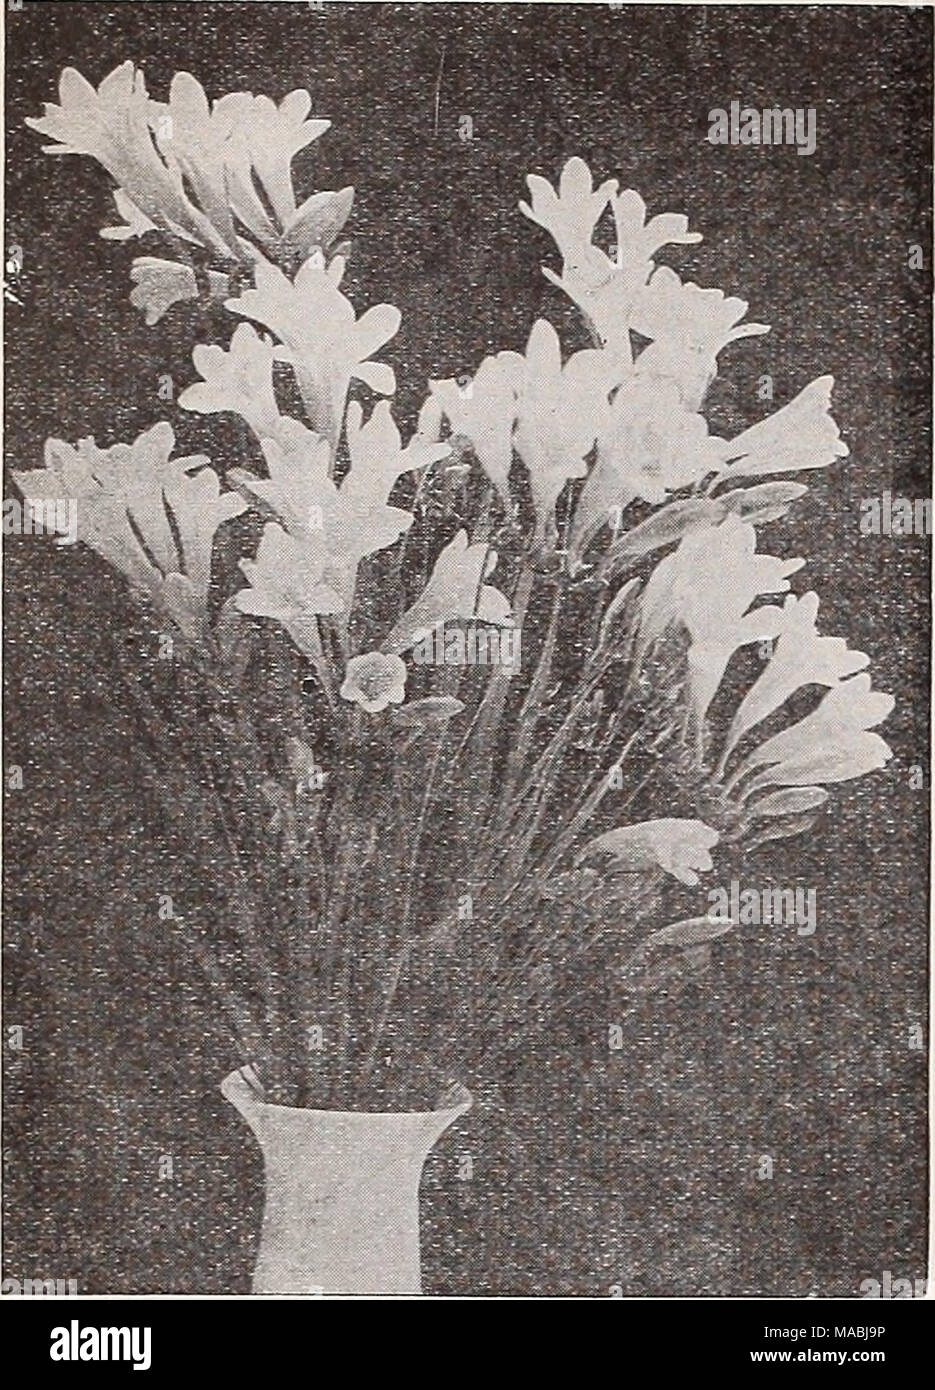 . Dreer's wholesale price list for florists : flower seeds lawn grass seeds bulbs plants sundries . Drecr's Improved Purity Freeslas Lilies for Easter Flowering Easter in 1934 comes on April 1st Lilium Harrisii (Ready early August) Our bulbs are carefully selected from a strain which Is of remarkable strong free growth, and val- uable for early forcing. Bulbs per Doz. 100 Case Case 7 to 9-in 200 $2 00 $14 00 $25 00 9 to 11-in 100 3 50 25 00 25 00 Lilium Philippinense Formosanum (Ready in August) A remarliable lily with umbels of large white fragrant, long trumpet shaped flowers. They are excel Stock Photo